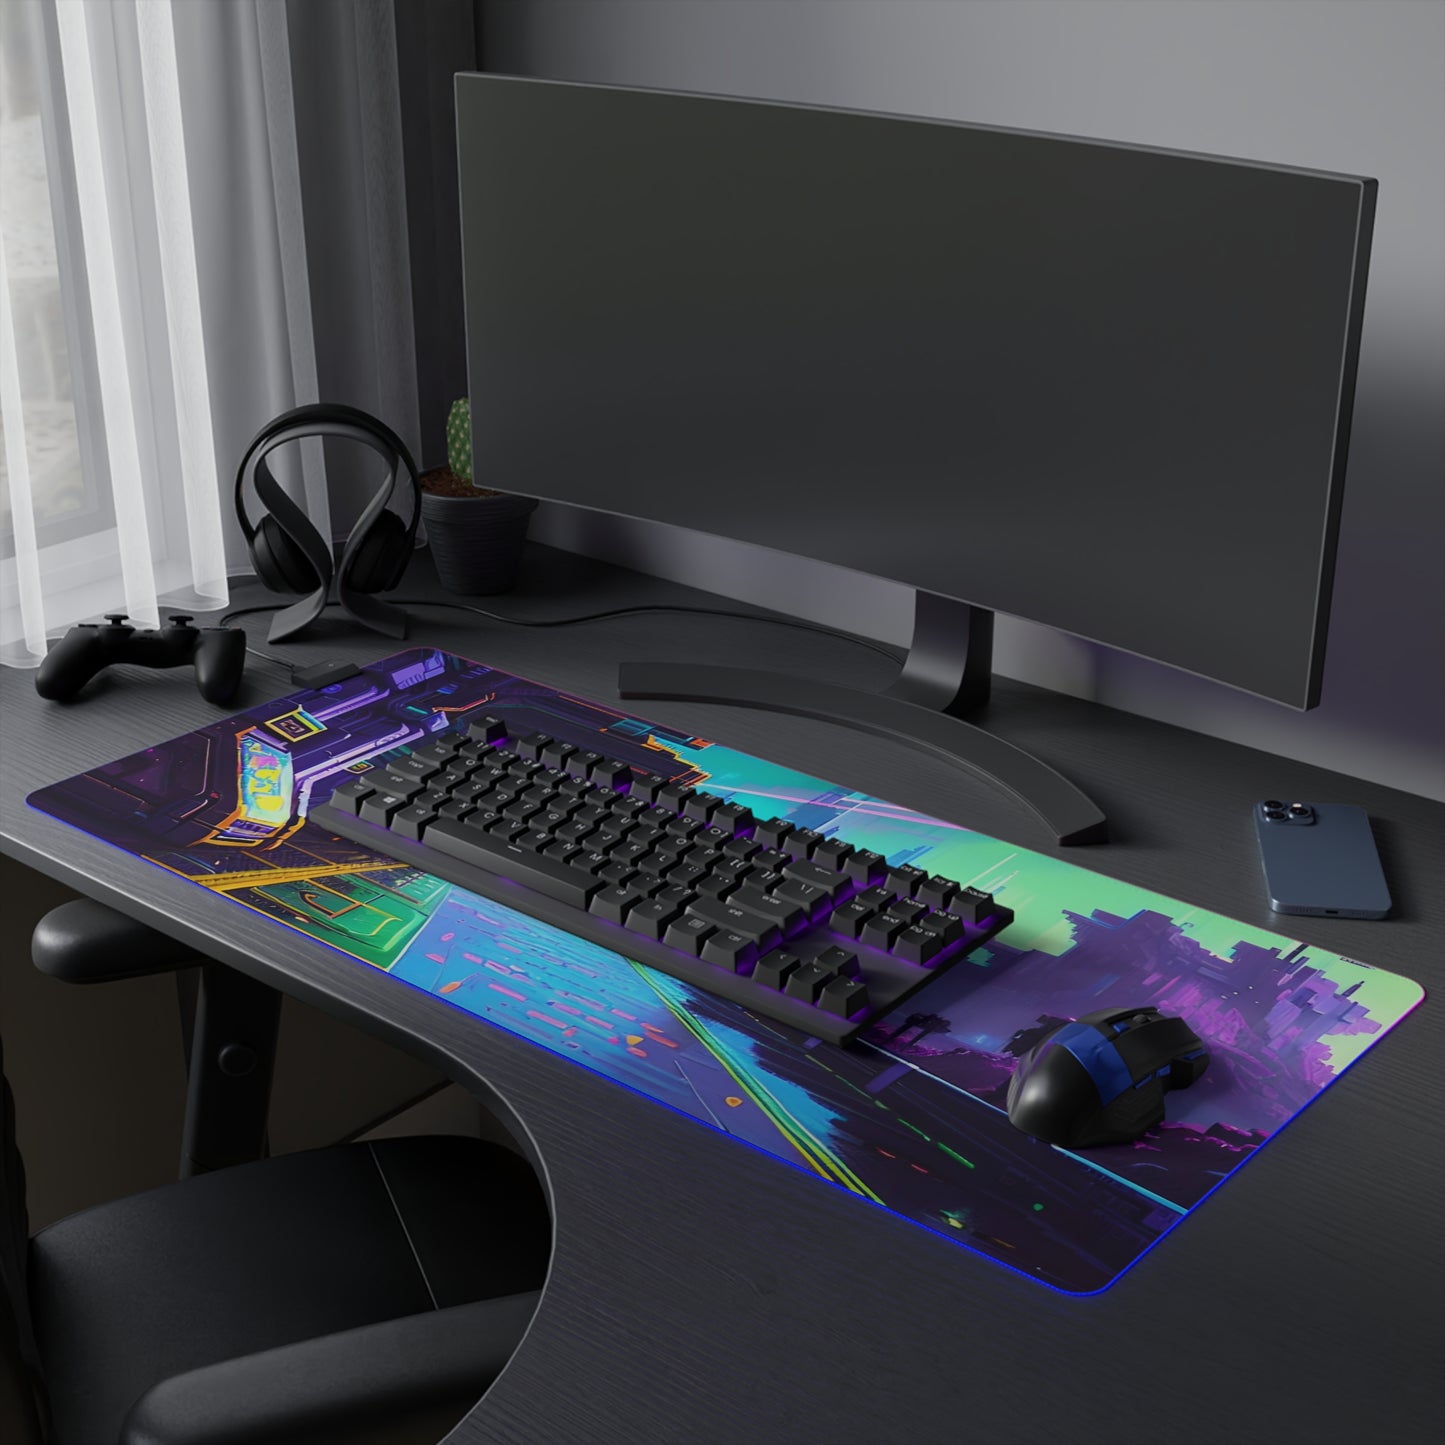 Pixel cyberpunk train station LED Gaming Mouse Pad